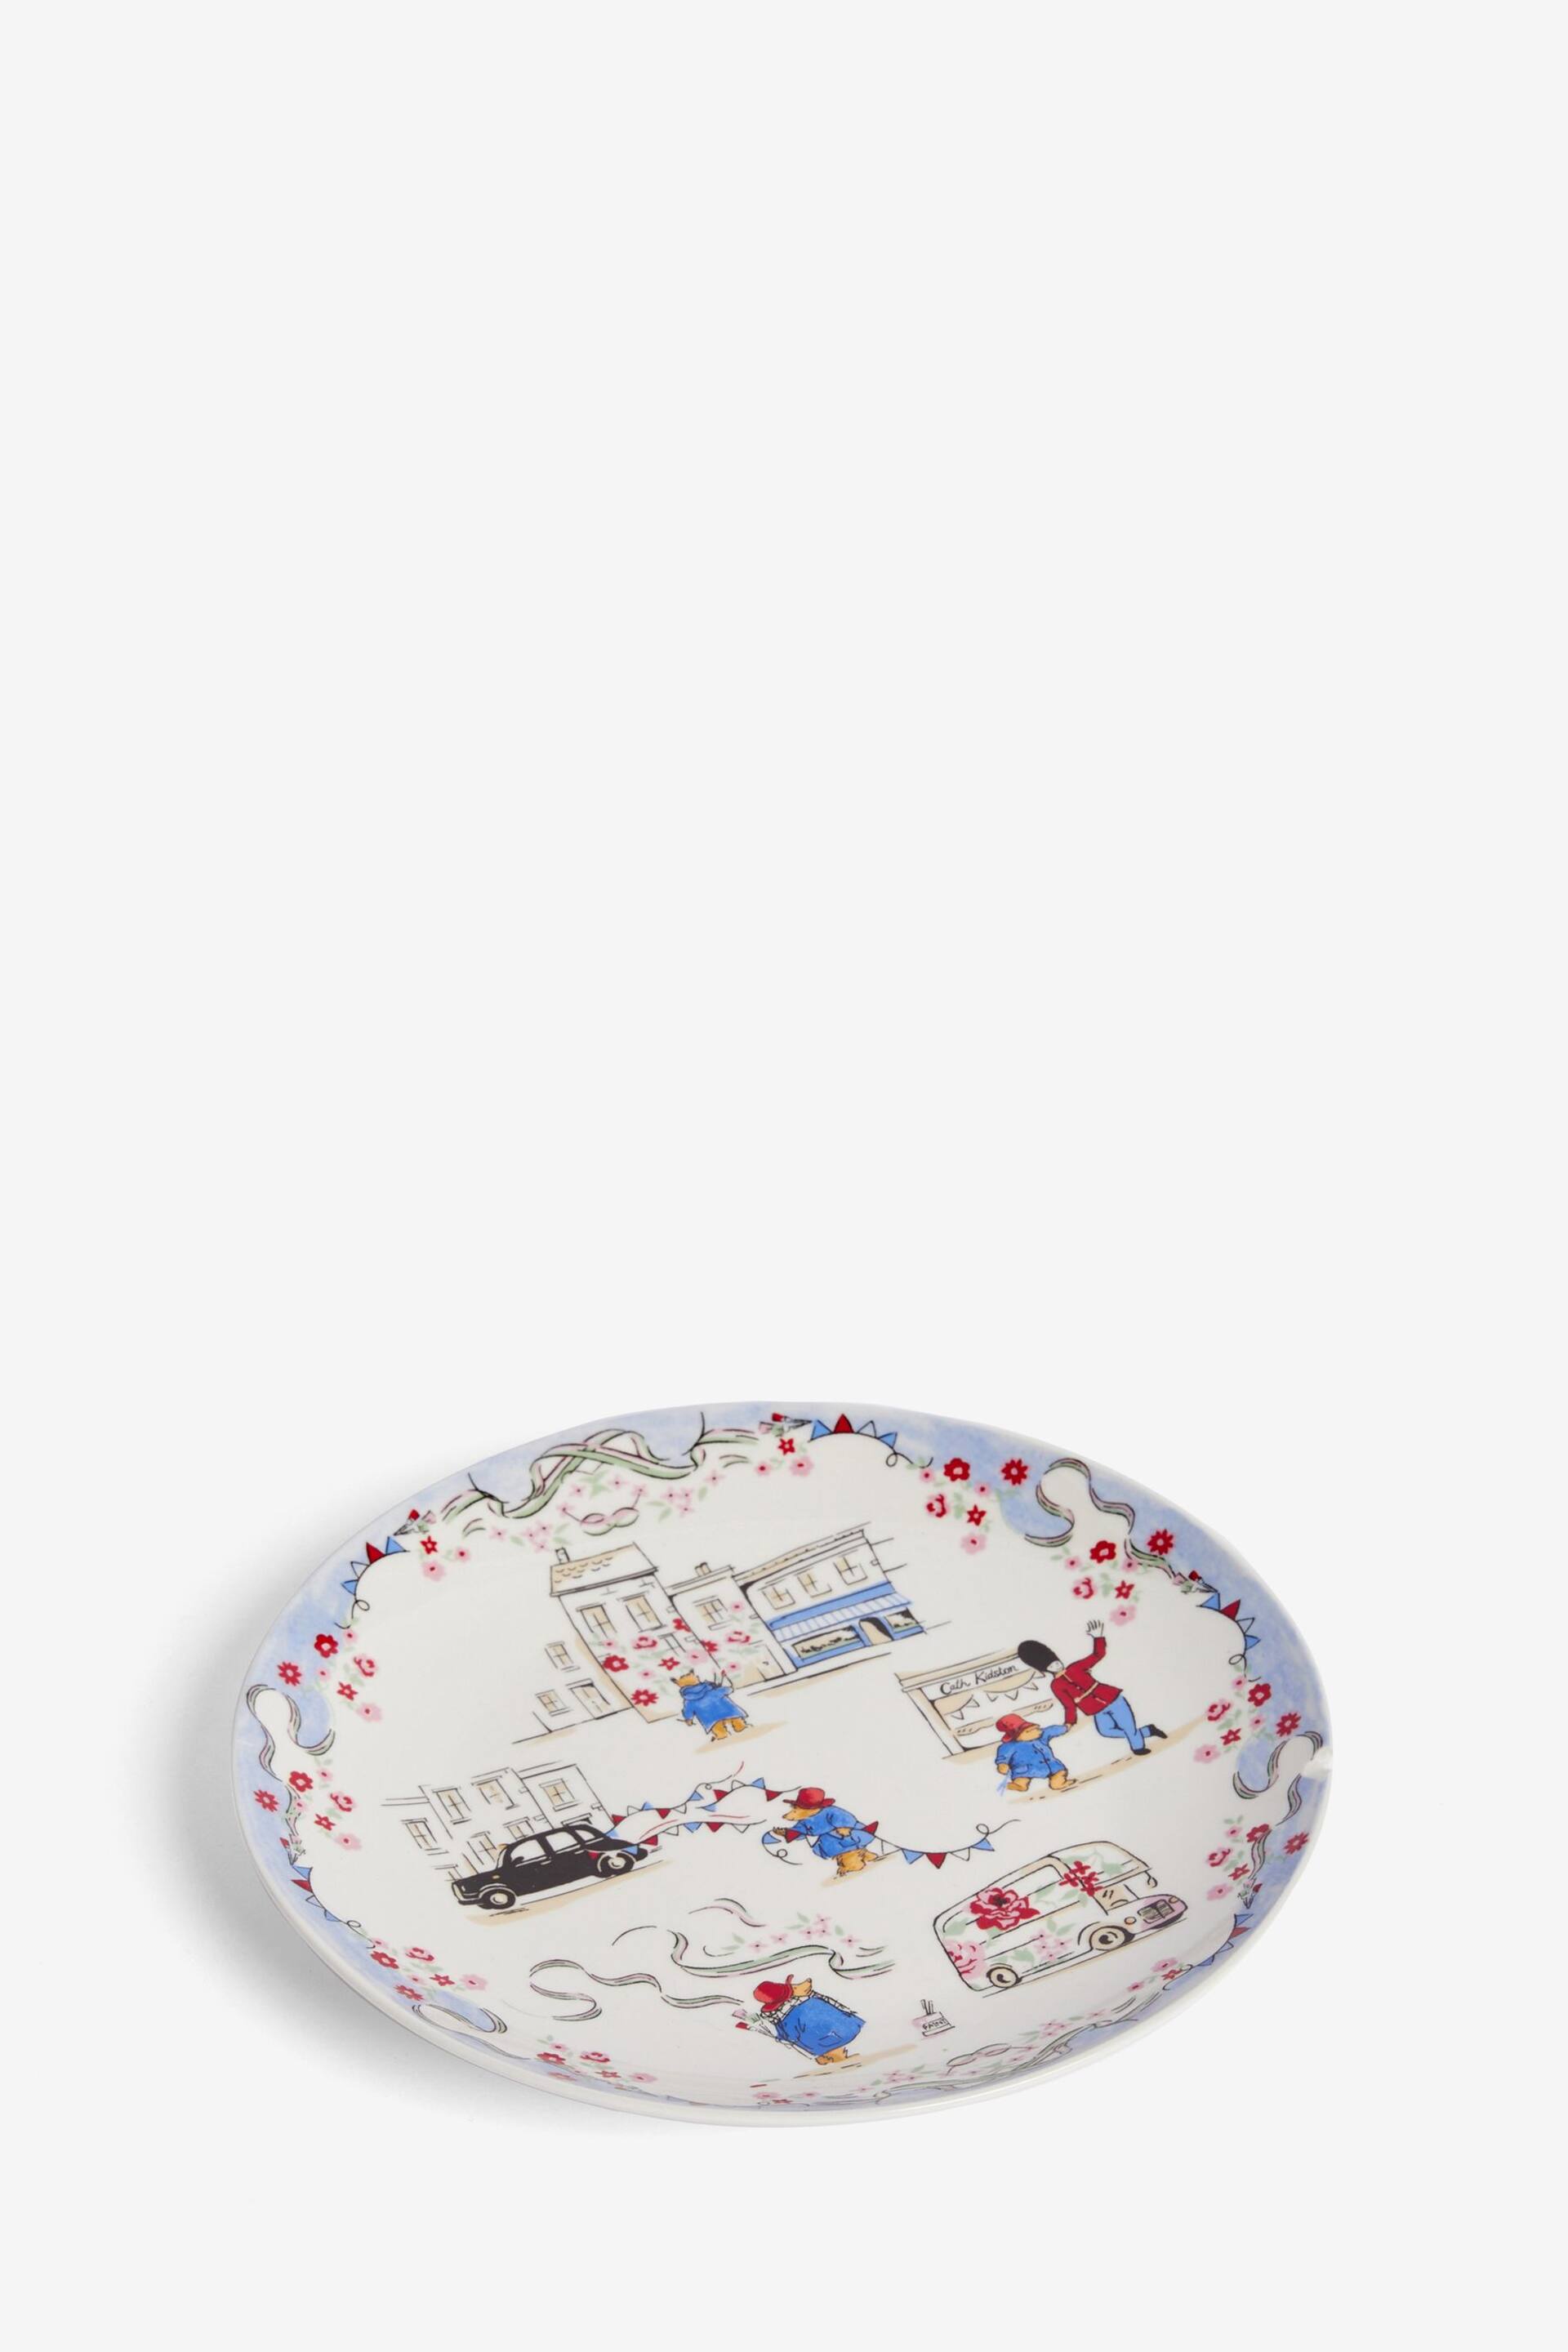 Cath Kidston Multi Paddington Goes to Town Side Plate - Image 15 of 15